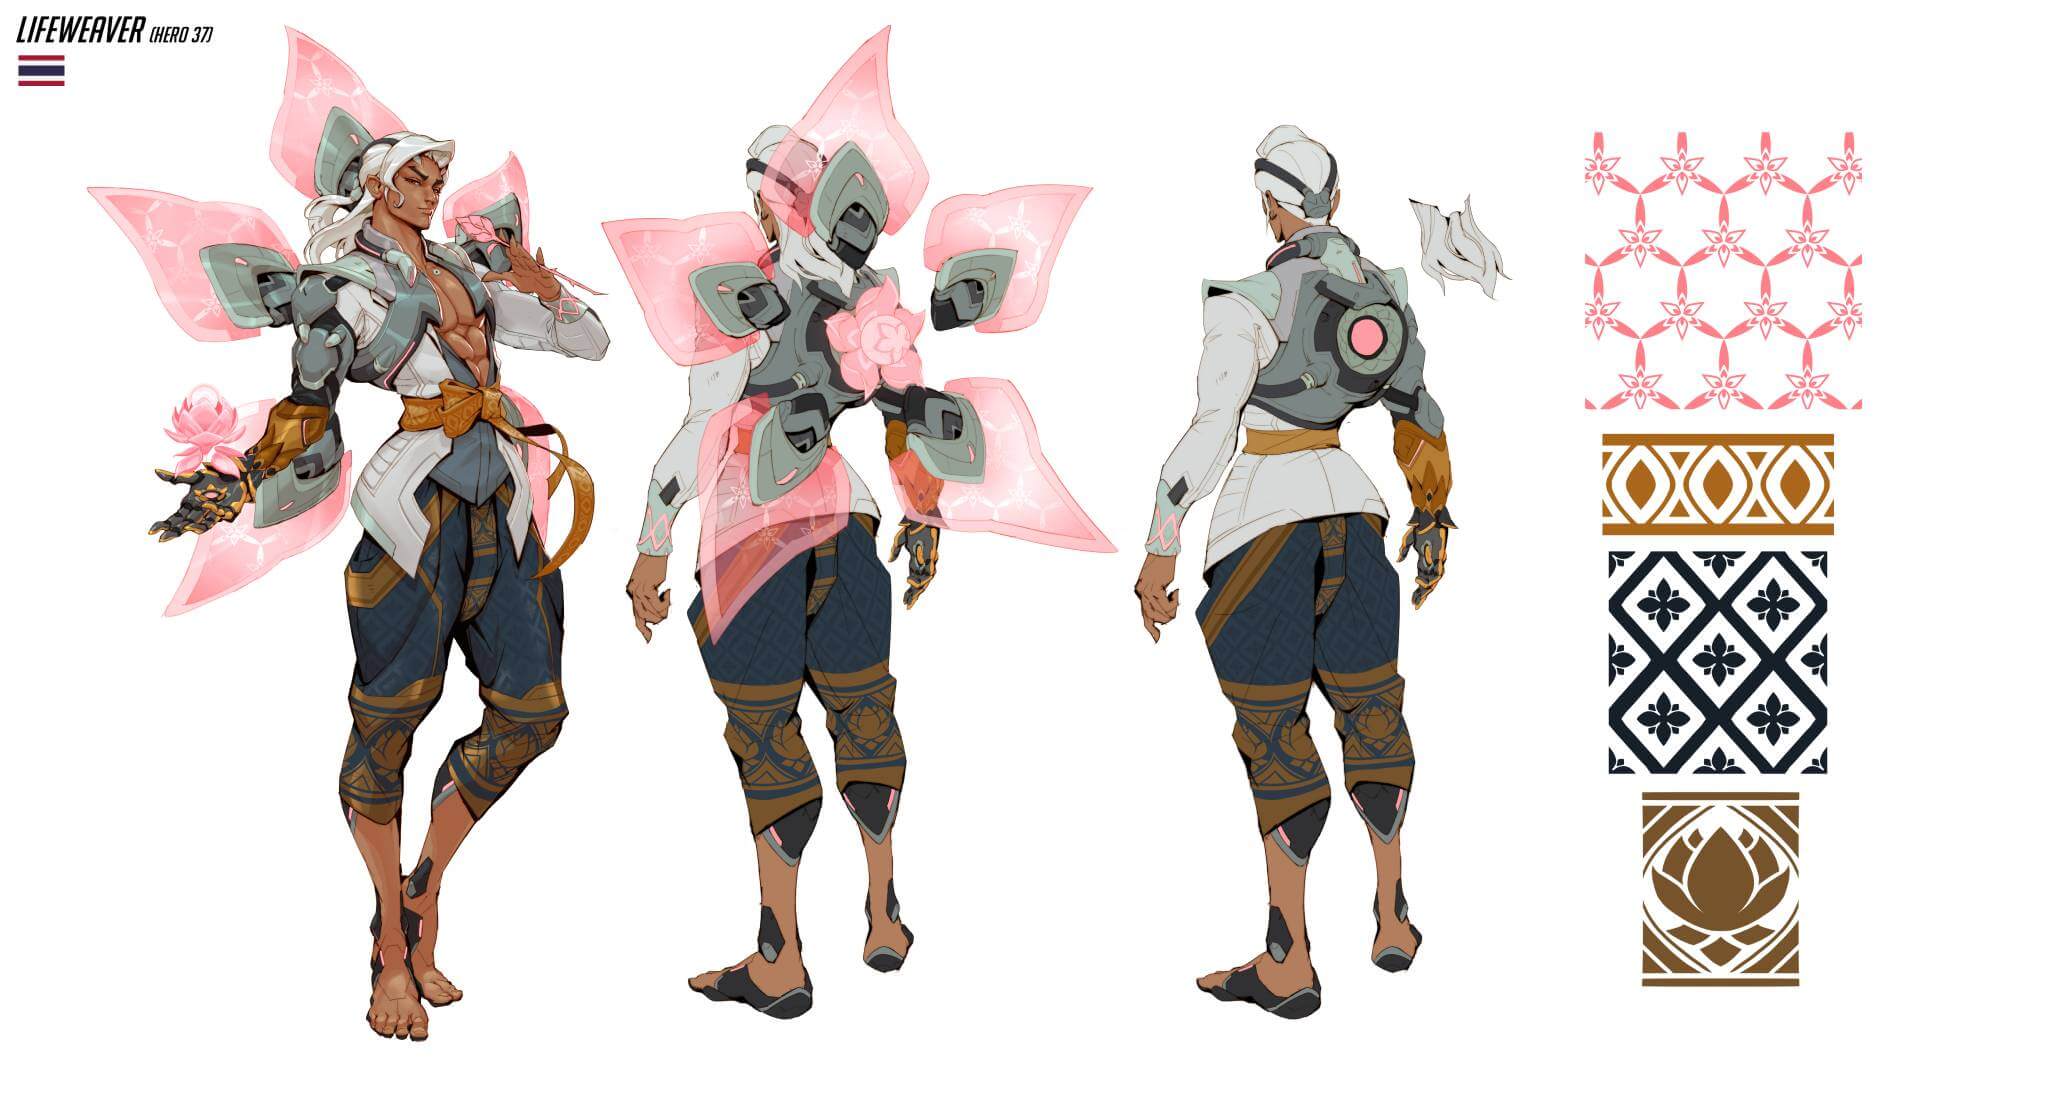 Concept art for the Overwatch 2 character Lifeweaver, highlighting a prominent flower-petal light projection device on his back.